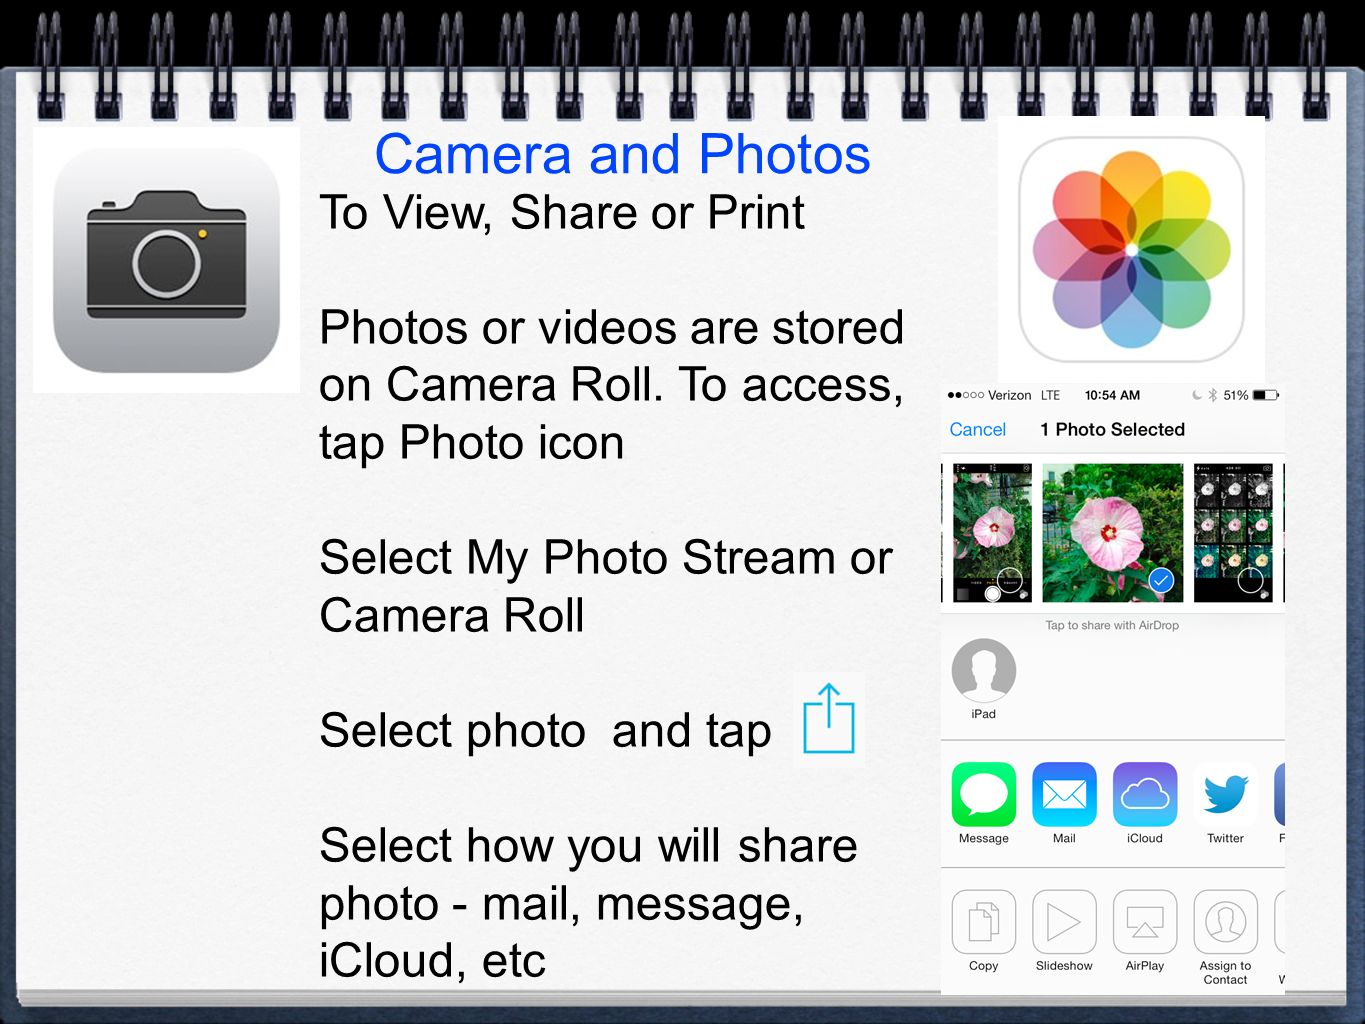 To View, Share or Print Photos or videos are stored on Camera Roll.